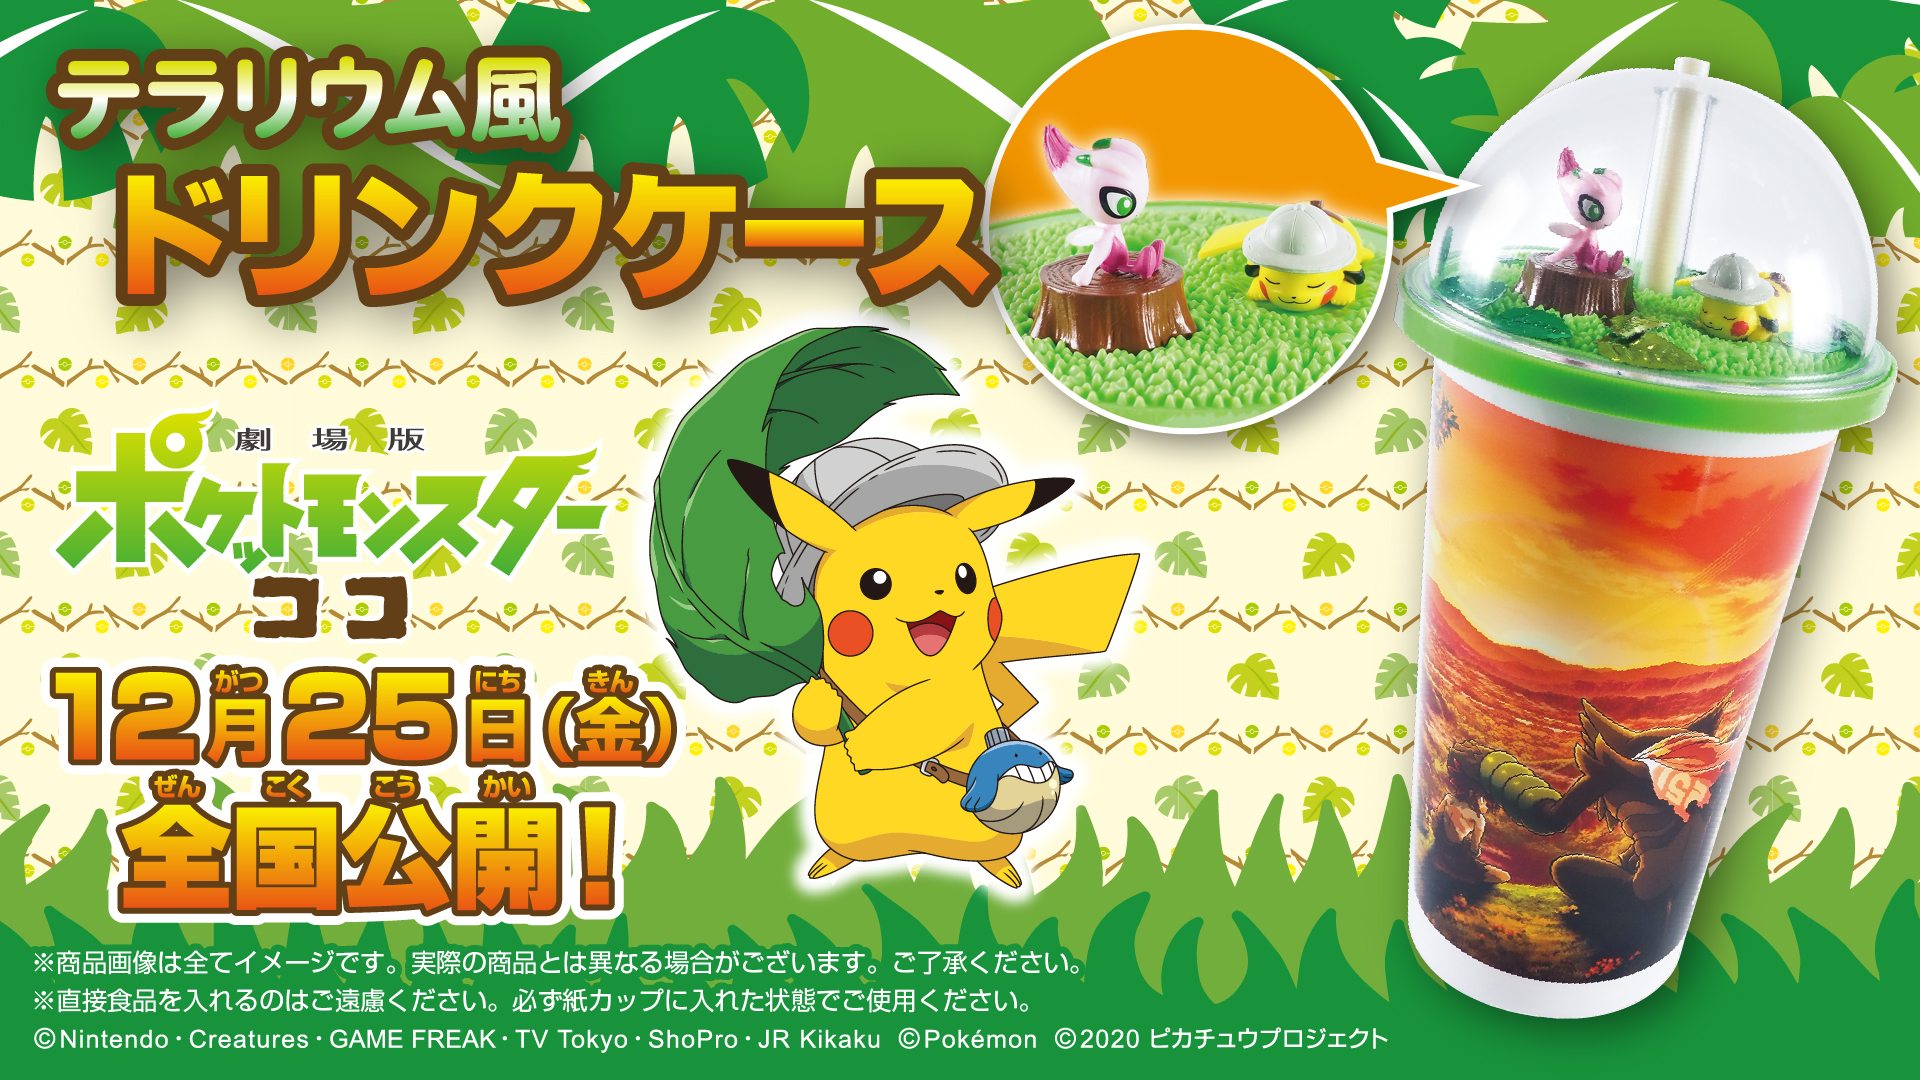 Special Terrarium Style Pokemon Cup Case To Be Sold At Movie Theaters With Release Of New Film Soranews24 Japan News